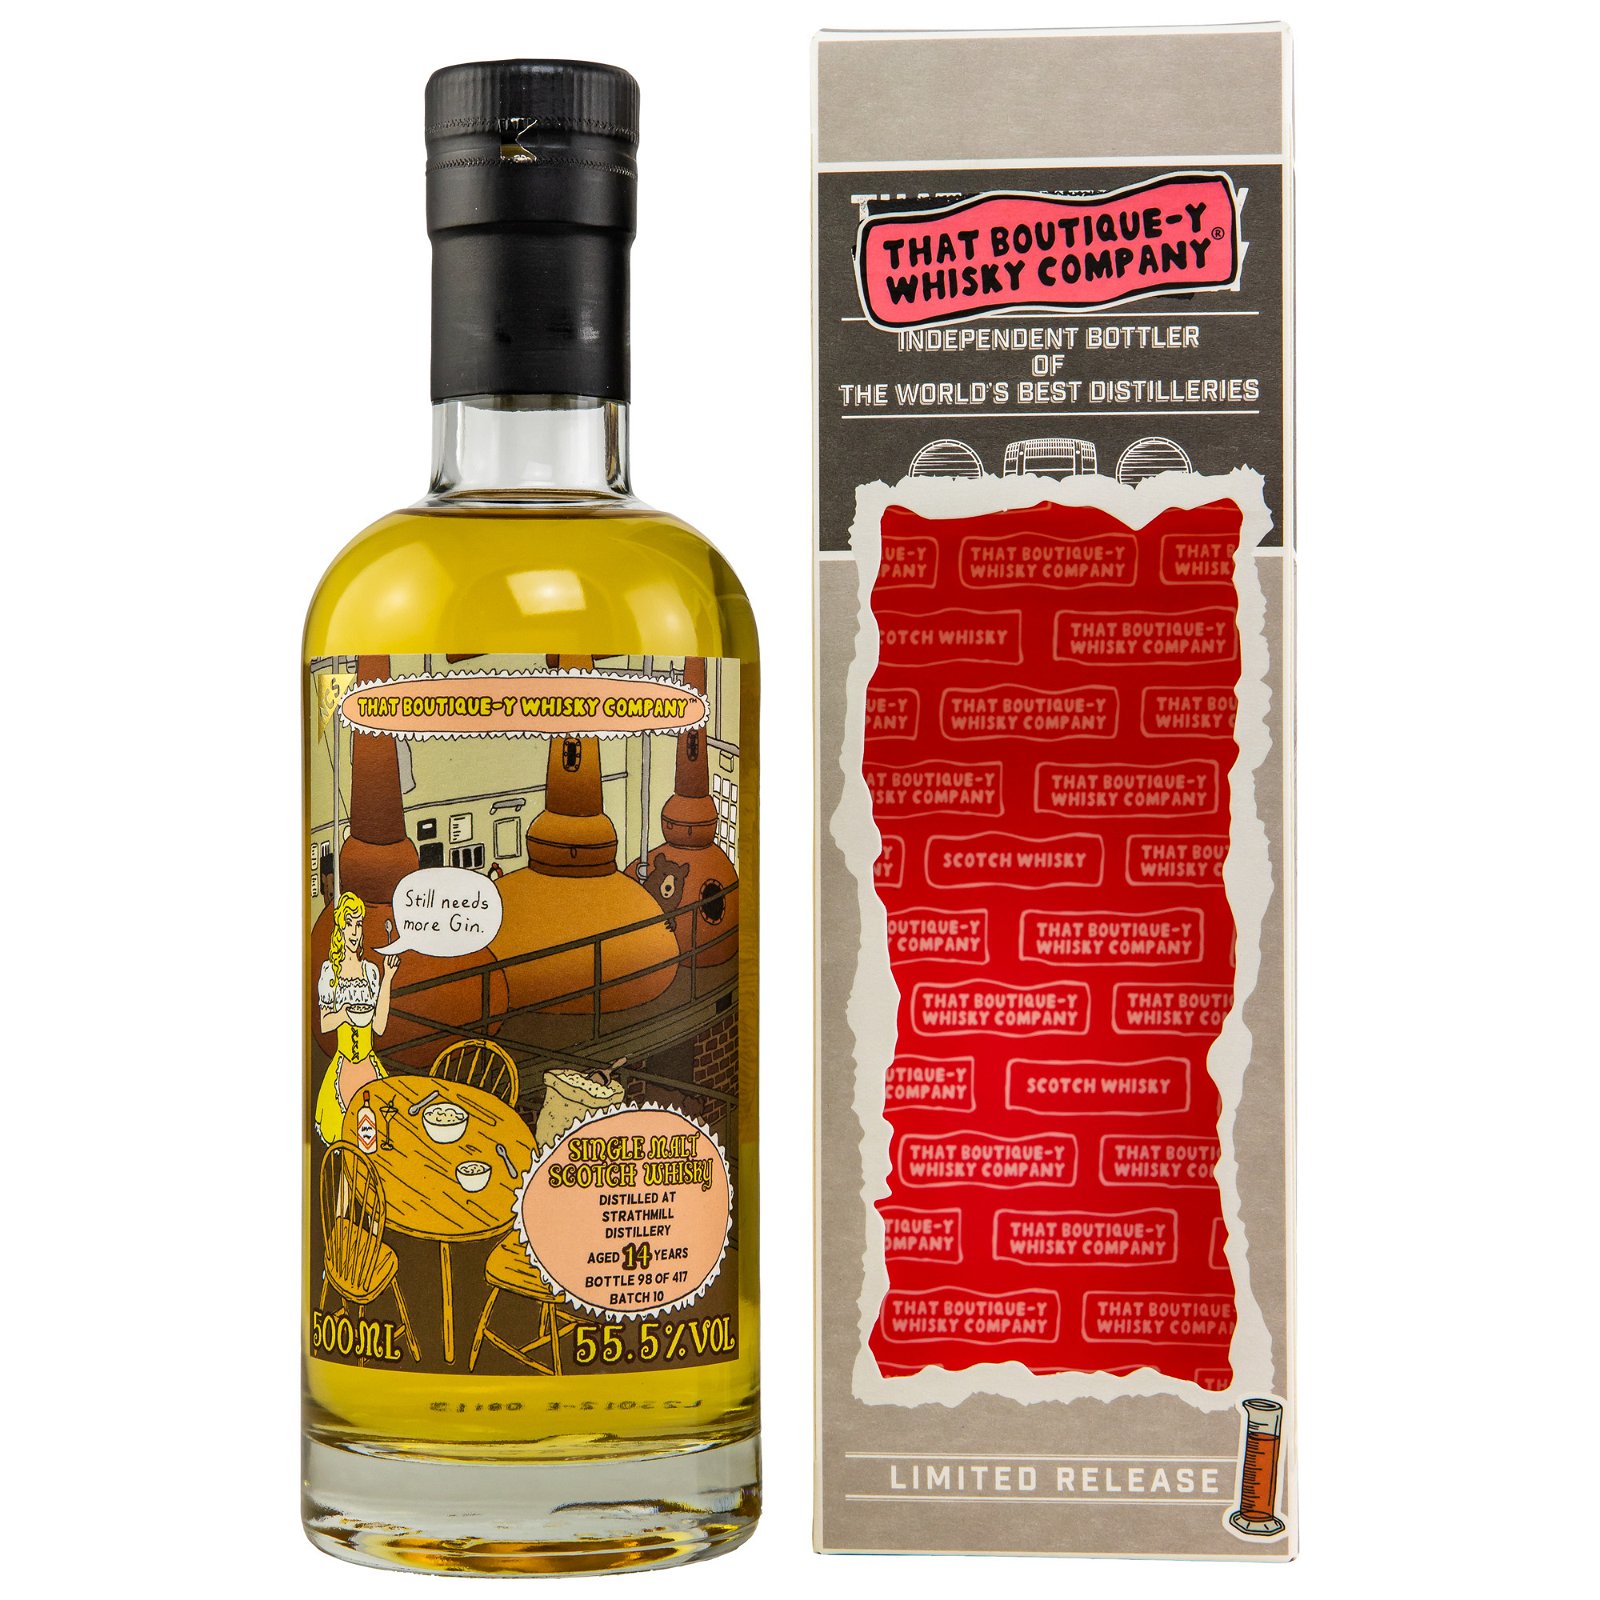 Strathmill 14 Jahre Batch 10 (That Boutique-y Whisky Company)